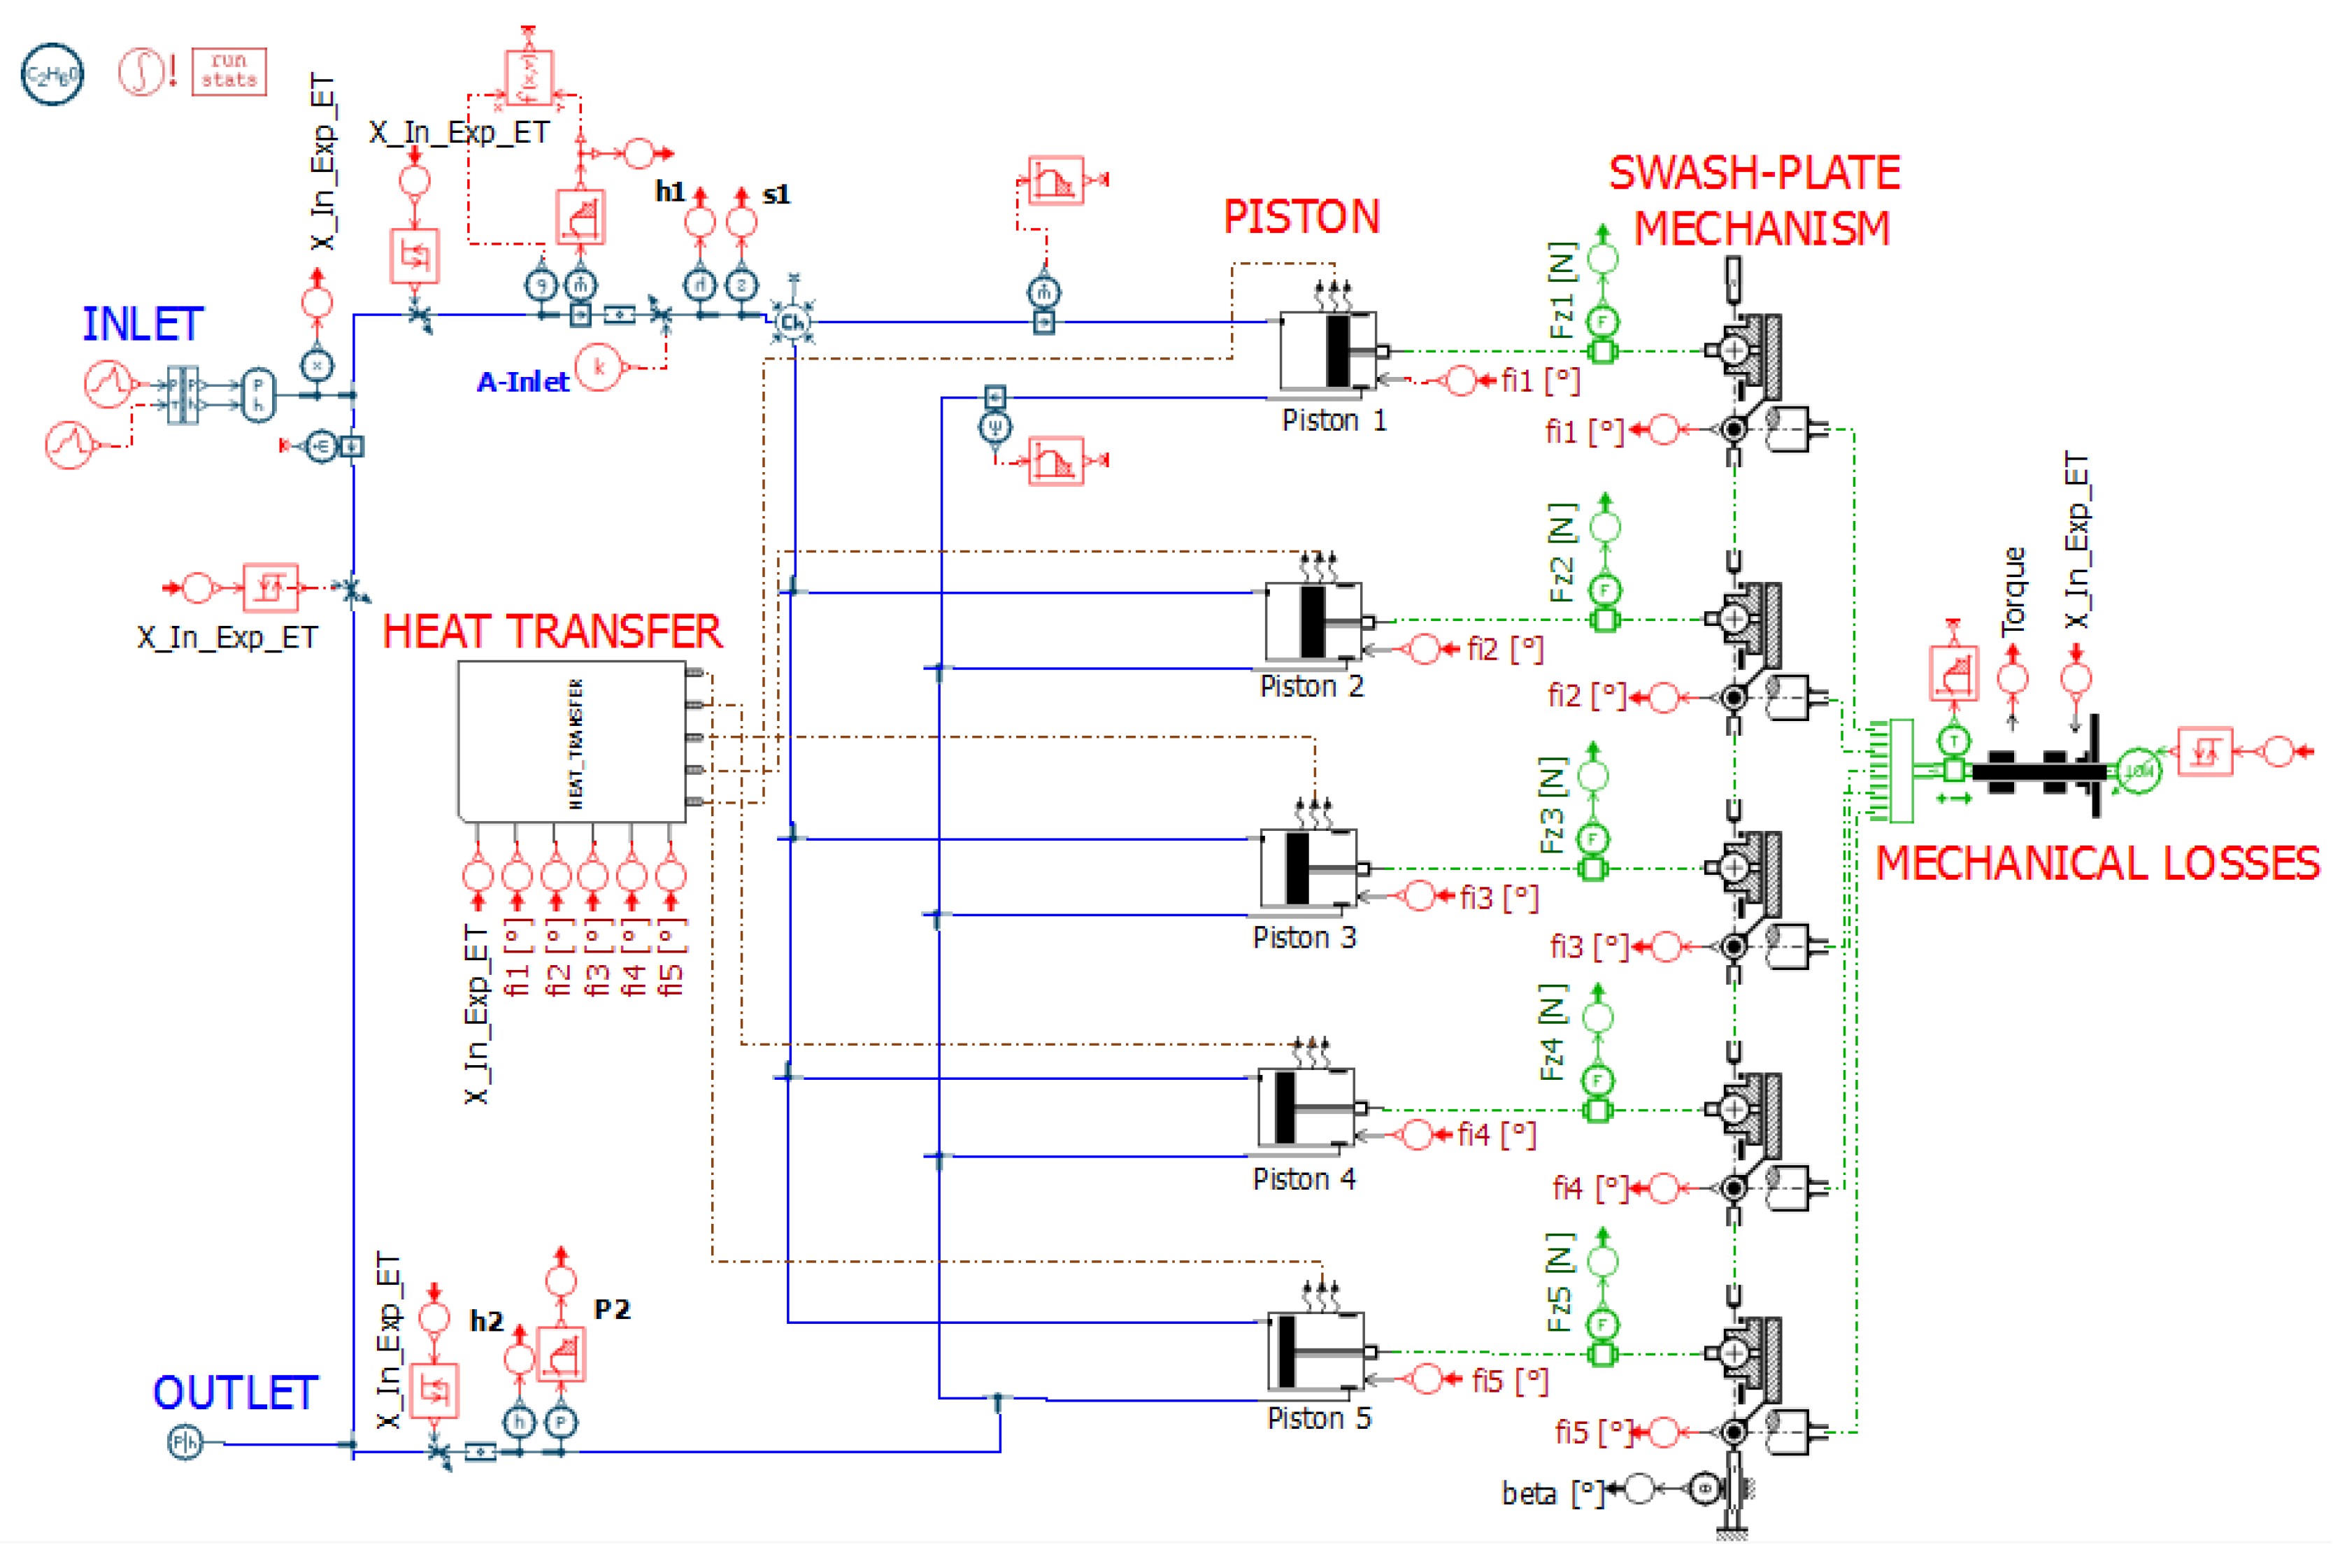 Combustion Engine Diagram Energies Free Full Text Of Combustion Engine Diagram